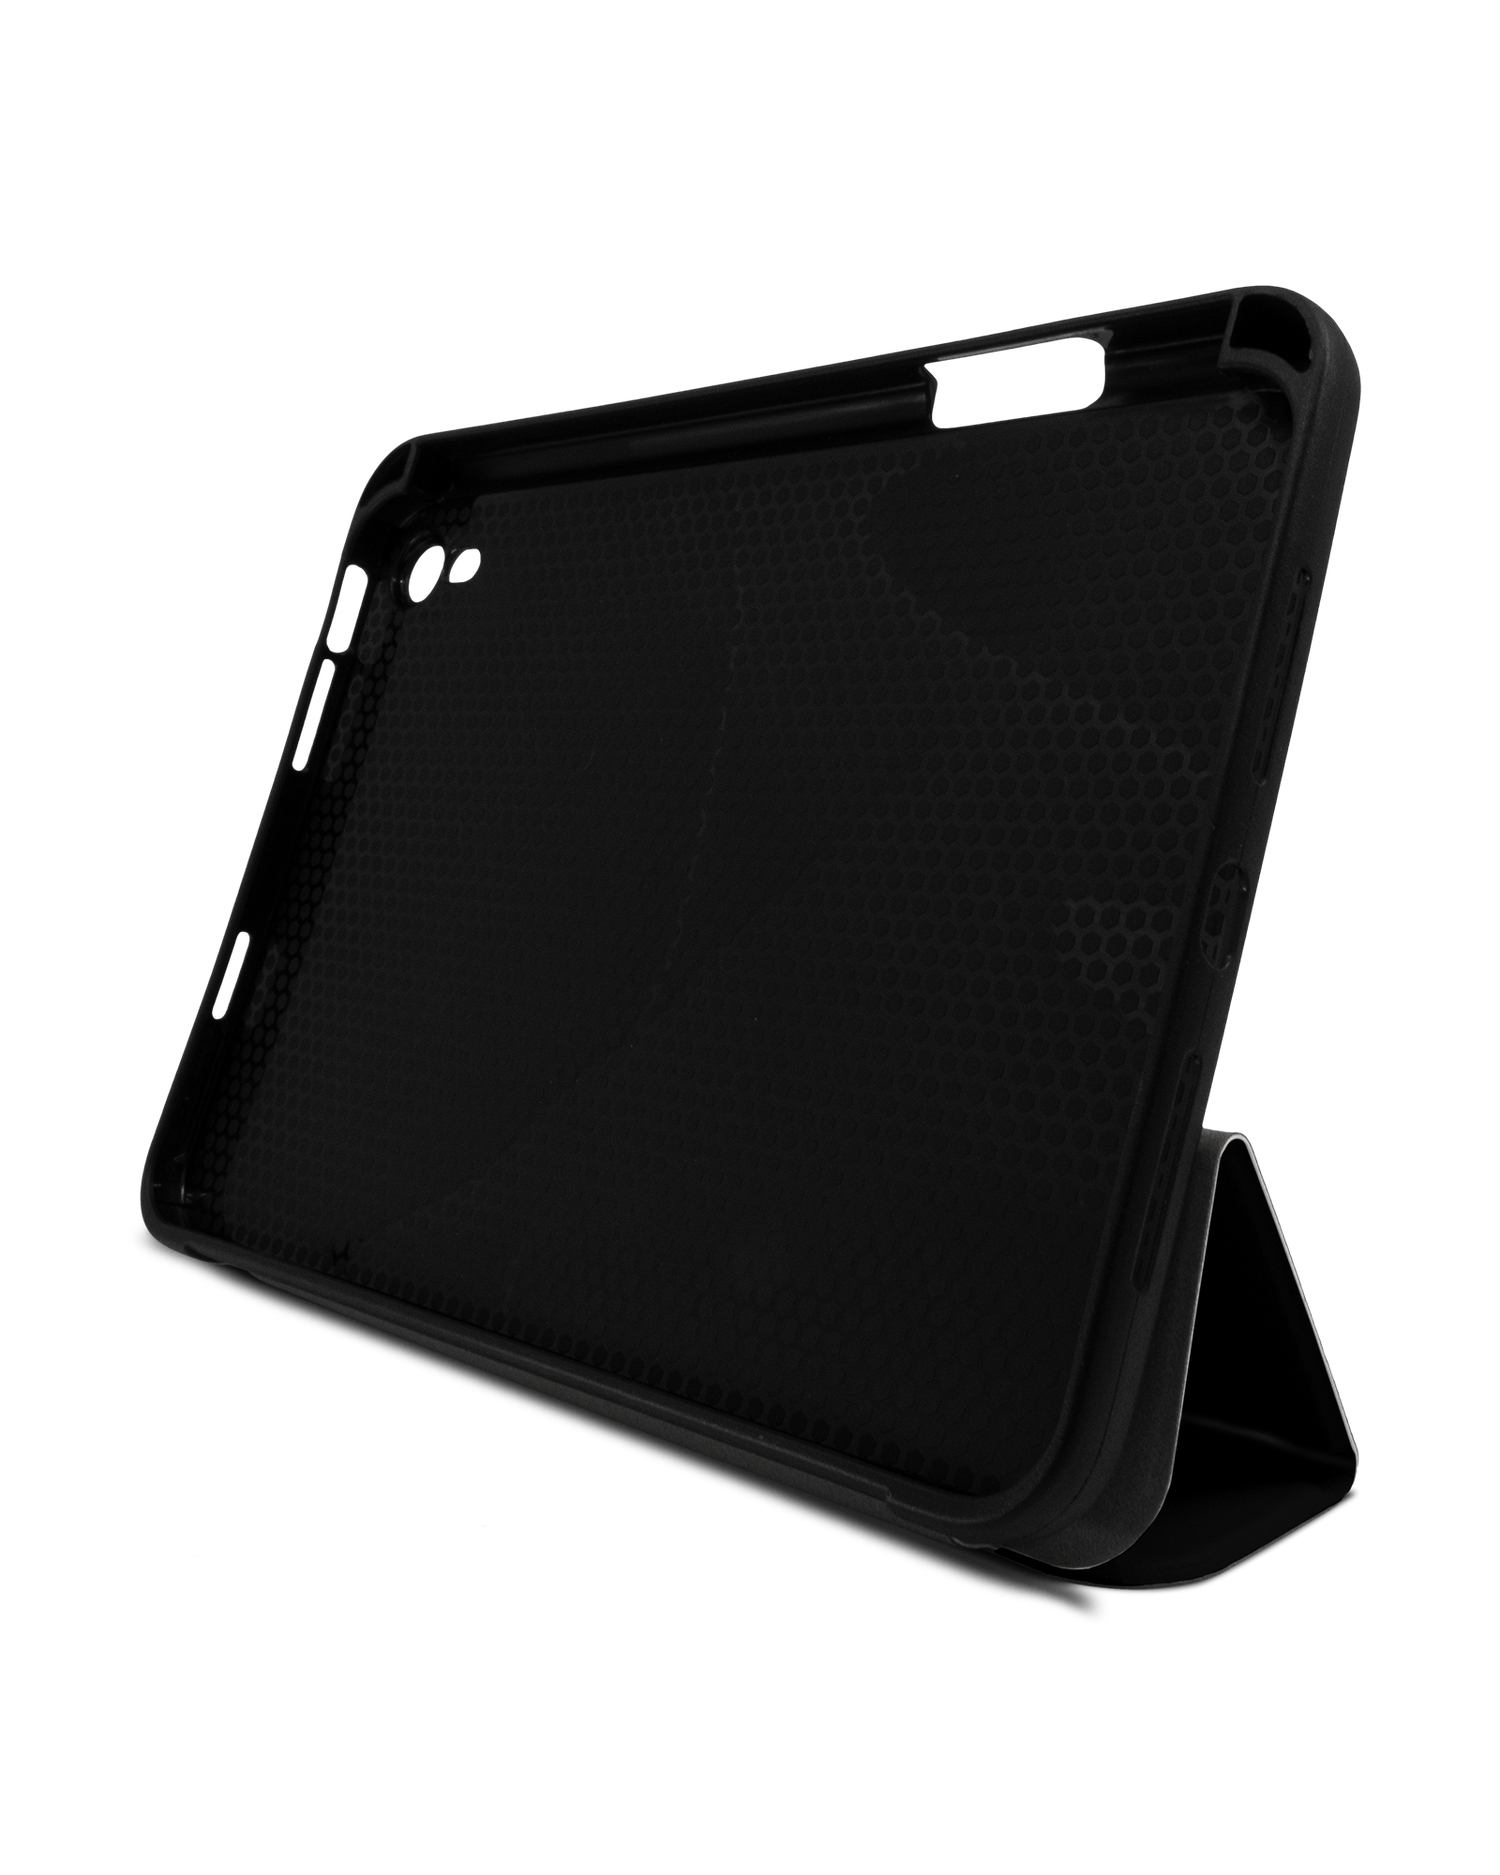 BLACK iPad Case with Pencil Holder Apple iPad mini 6 (2021): Set up in landscape format (front view)